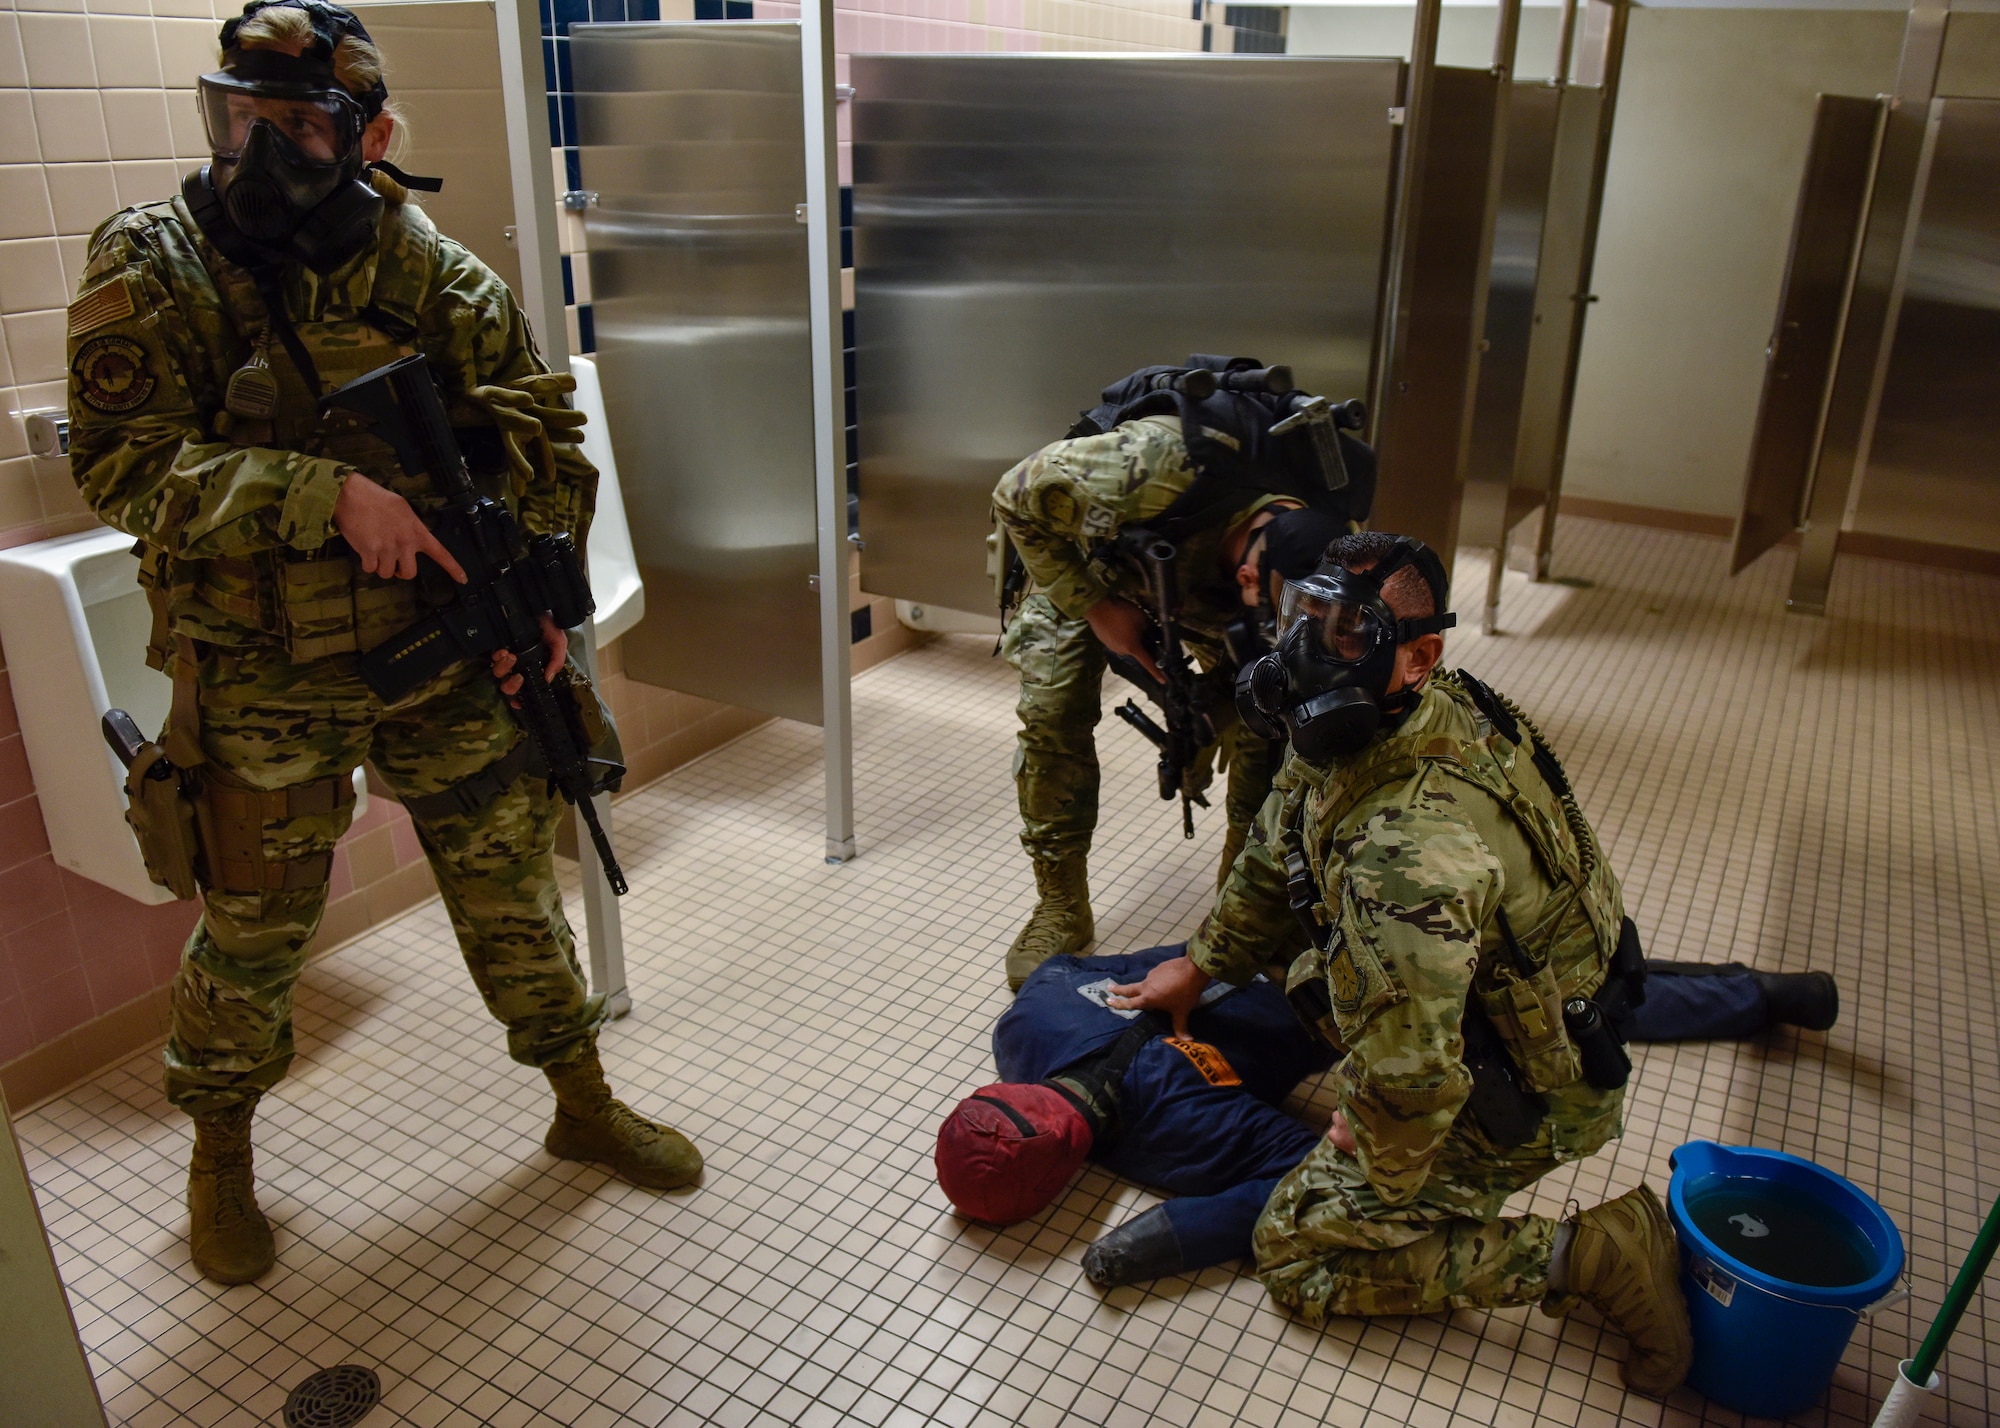 Team members from the 377th Security Forces Squadron Alpha Flight treat a simulated patient as part of a chemical, biological, radiological, nuclear and high–yield explosive emergency during exercise Global Thunder 20 at Kirtland Air Force Base, N.M., Oct. 24, 2019. Global Thunder is a worldwide exercise that provides training opportunities for all of U.S. Strategic Command’s mission areas, tests joint and field training operations, and has a specific focus on nuclear readiness. (U.S. Air Force photo by Airman 1st Class Austin J. Prisbrey)